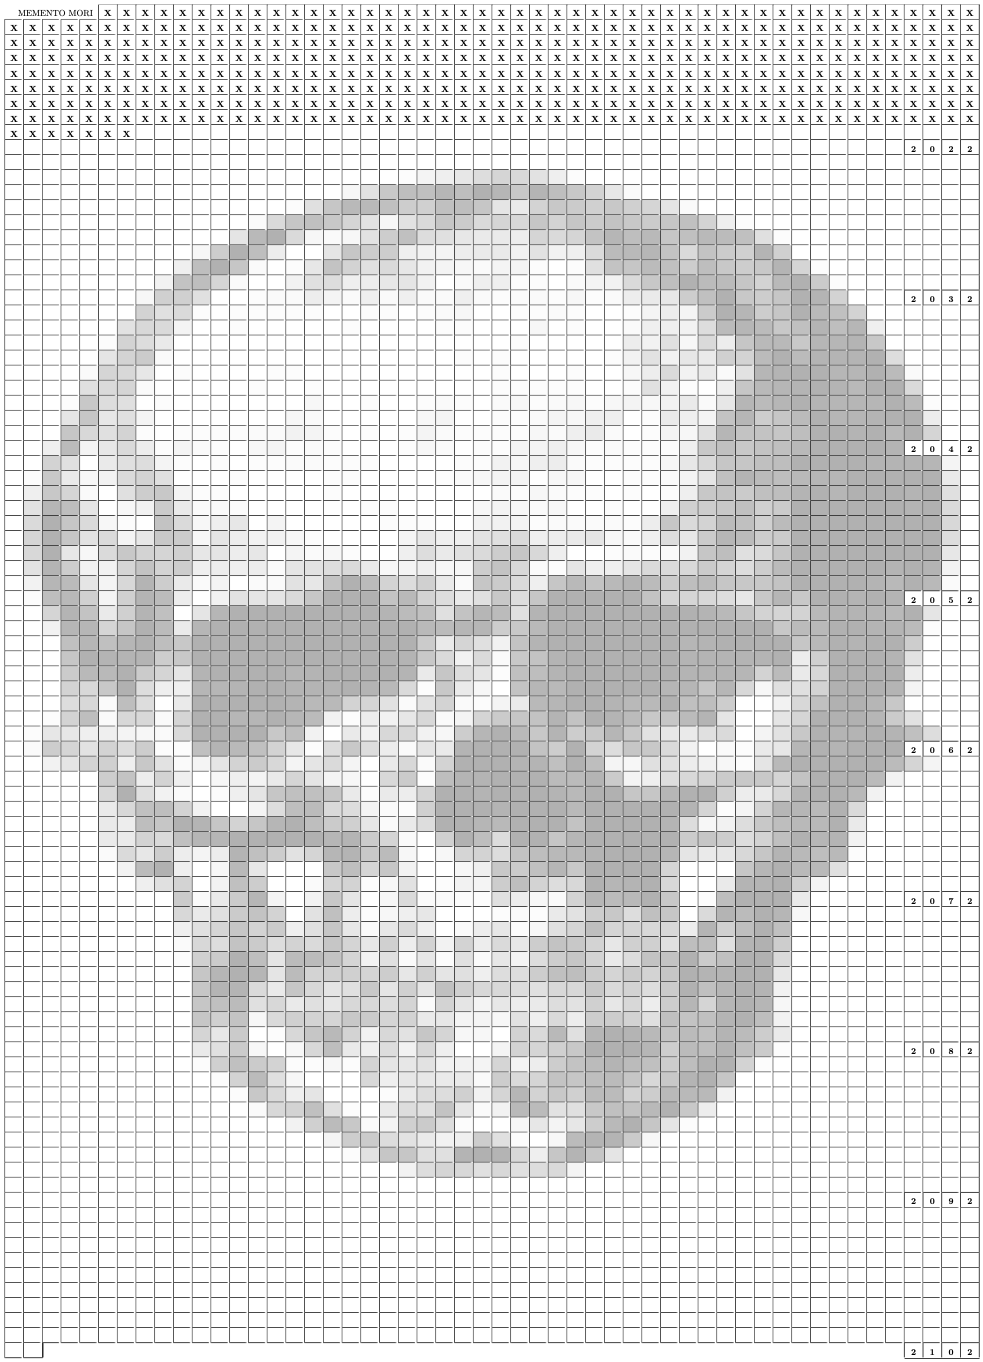 Image of the weeks of a 90 year life arranged in a grid with a skull background